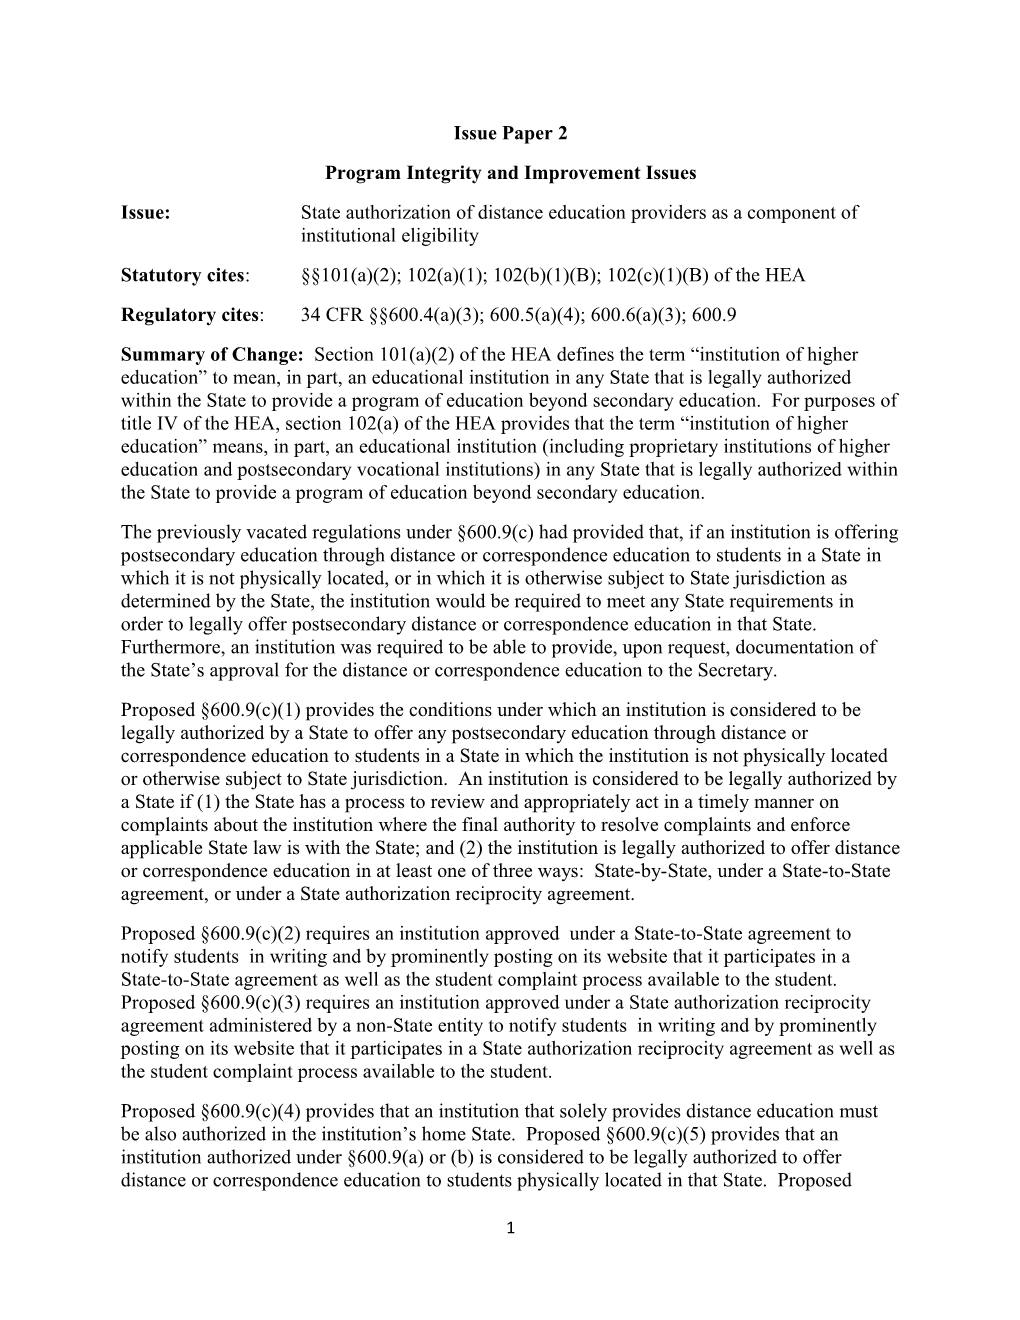 Negotiated Rulemaking for Higher Education 2012-2014: PII Session 2 - Issue Paper 2, State